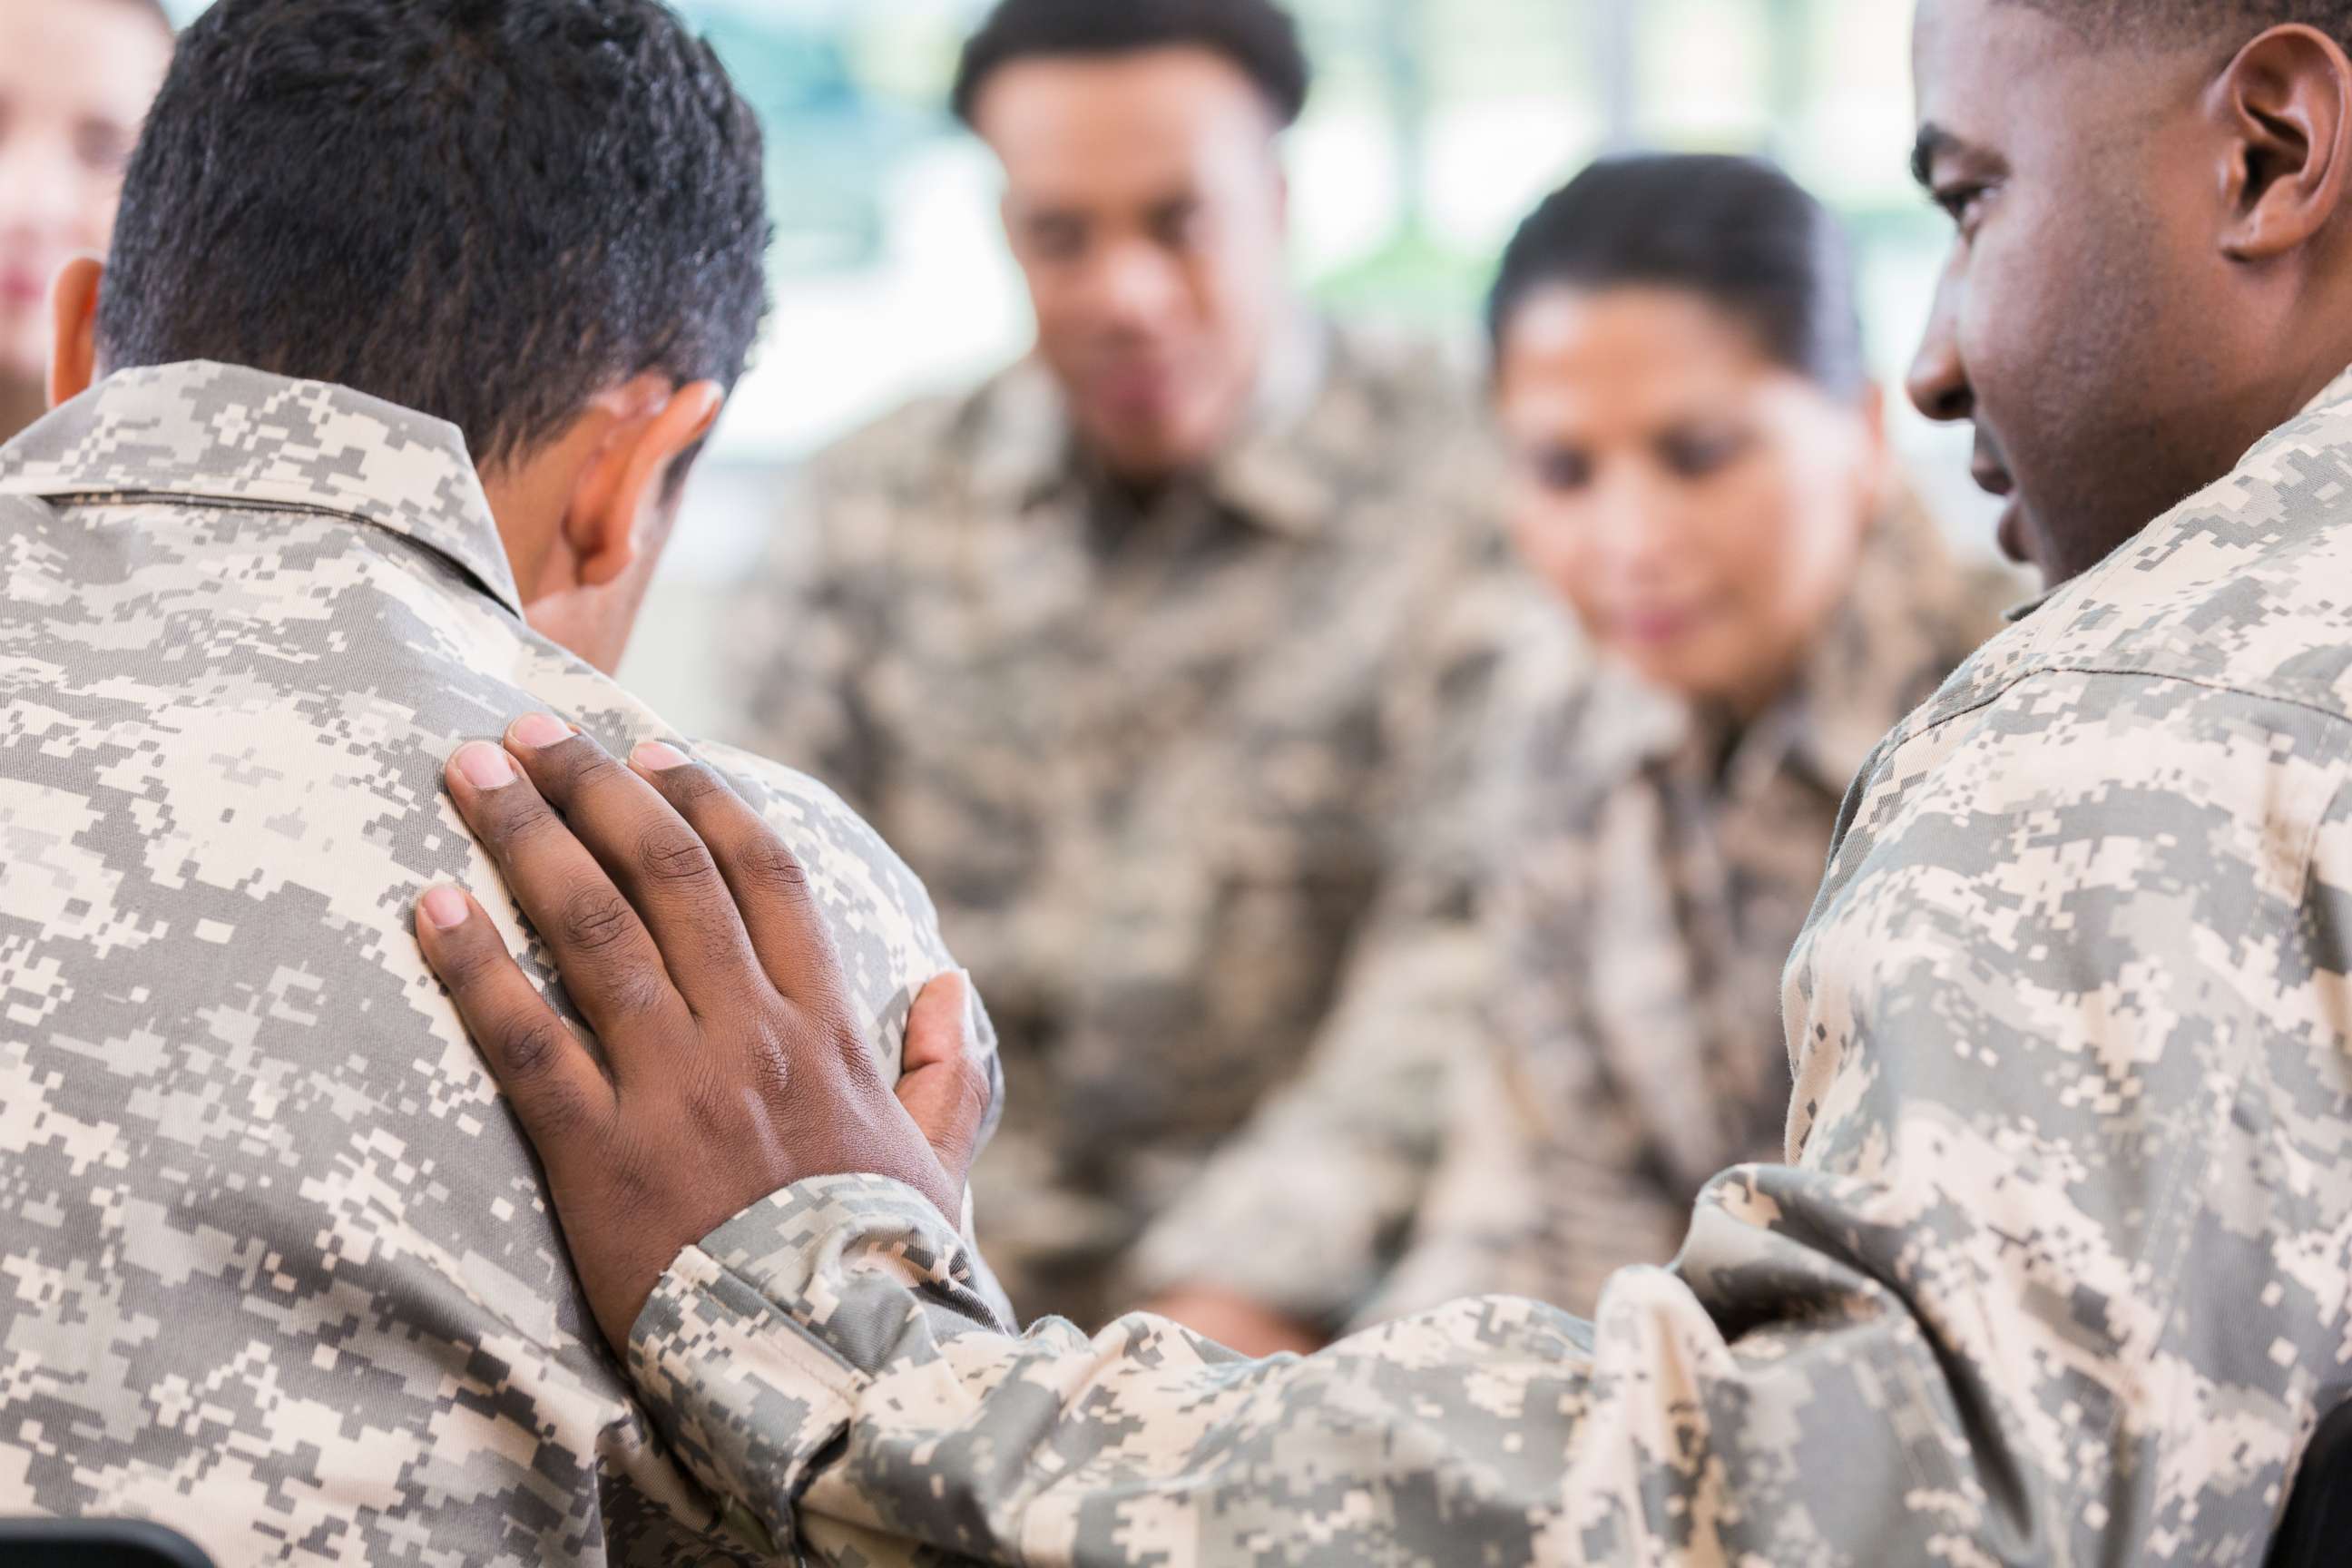 PHOTO: People in military uniform talk during a support group in an undated stock photo.